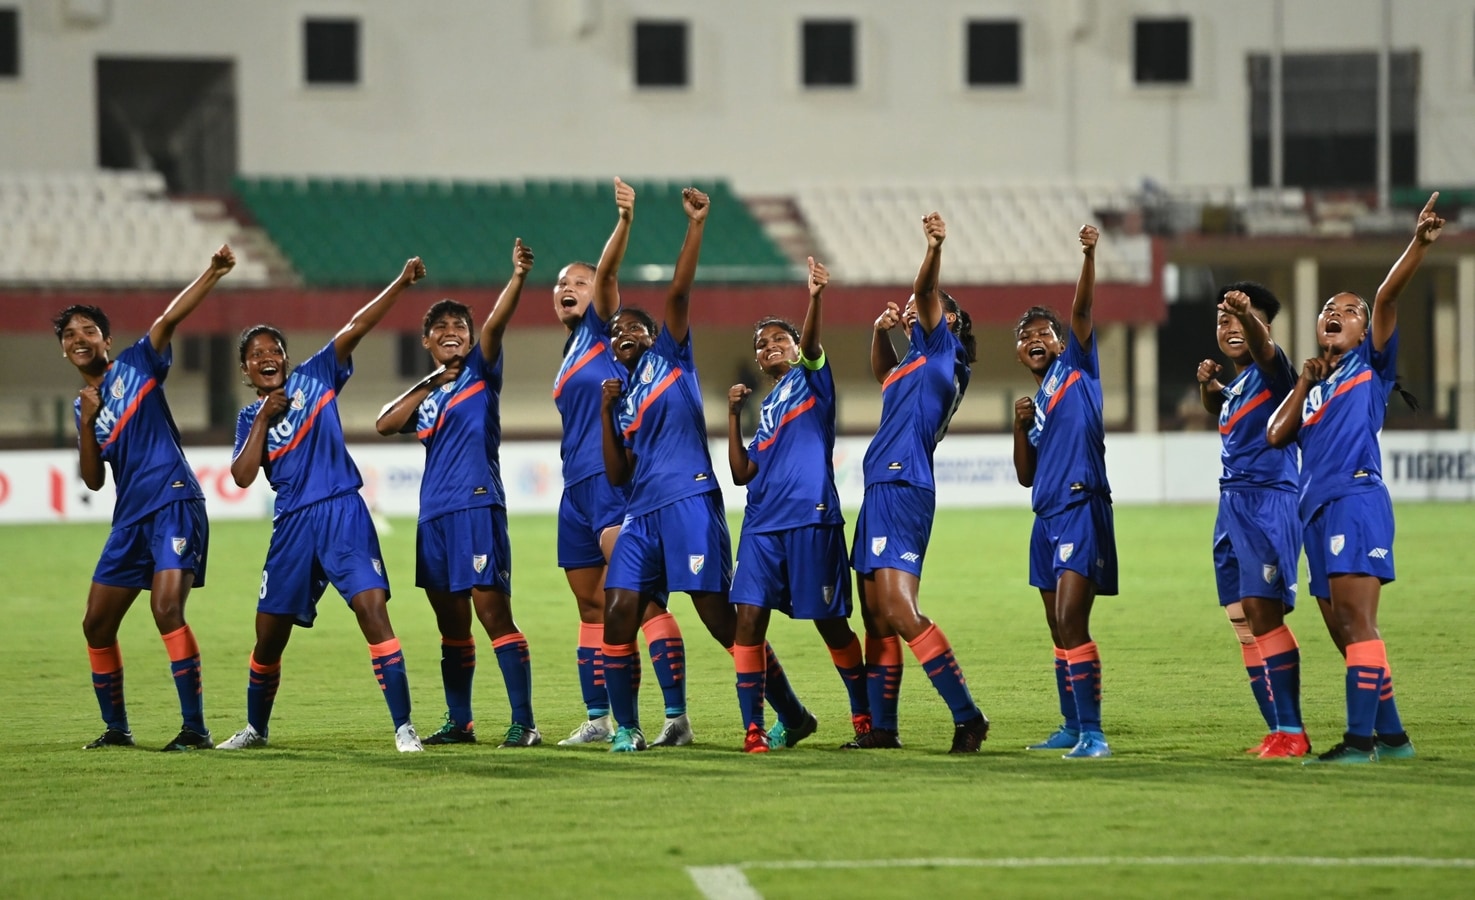 Indian Women’s League champions Chauhan, Chibber laud Indian Arrows project